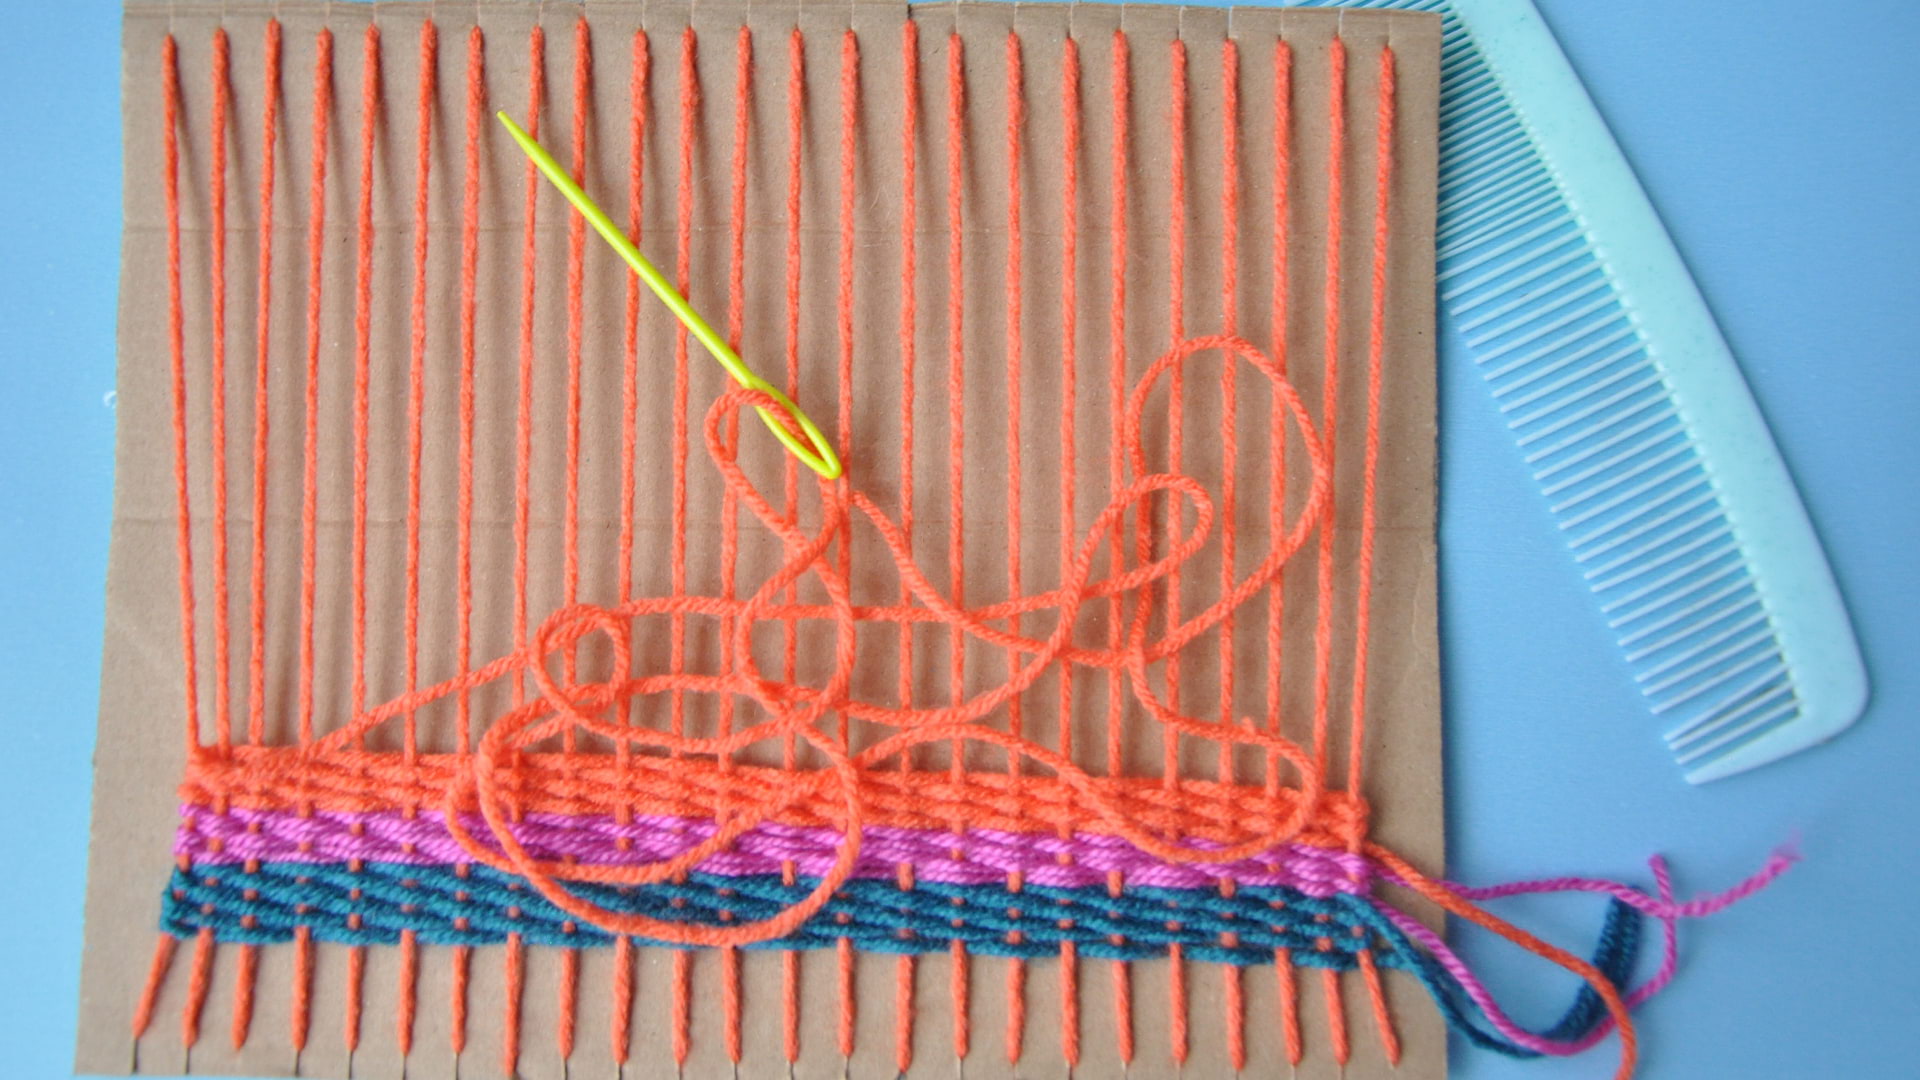 Weaving with Colorful Fabric slide 1